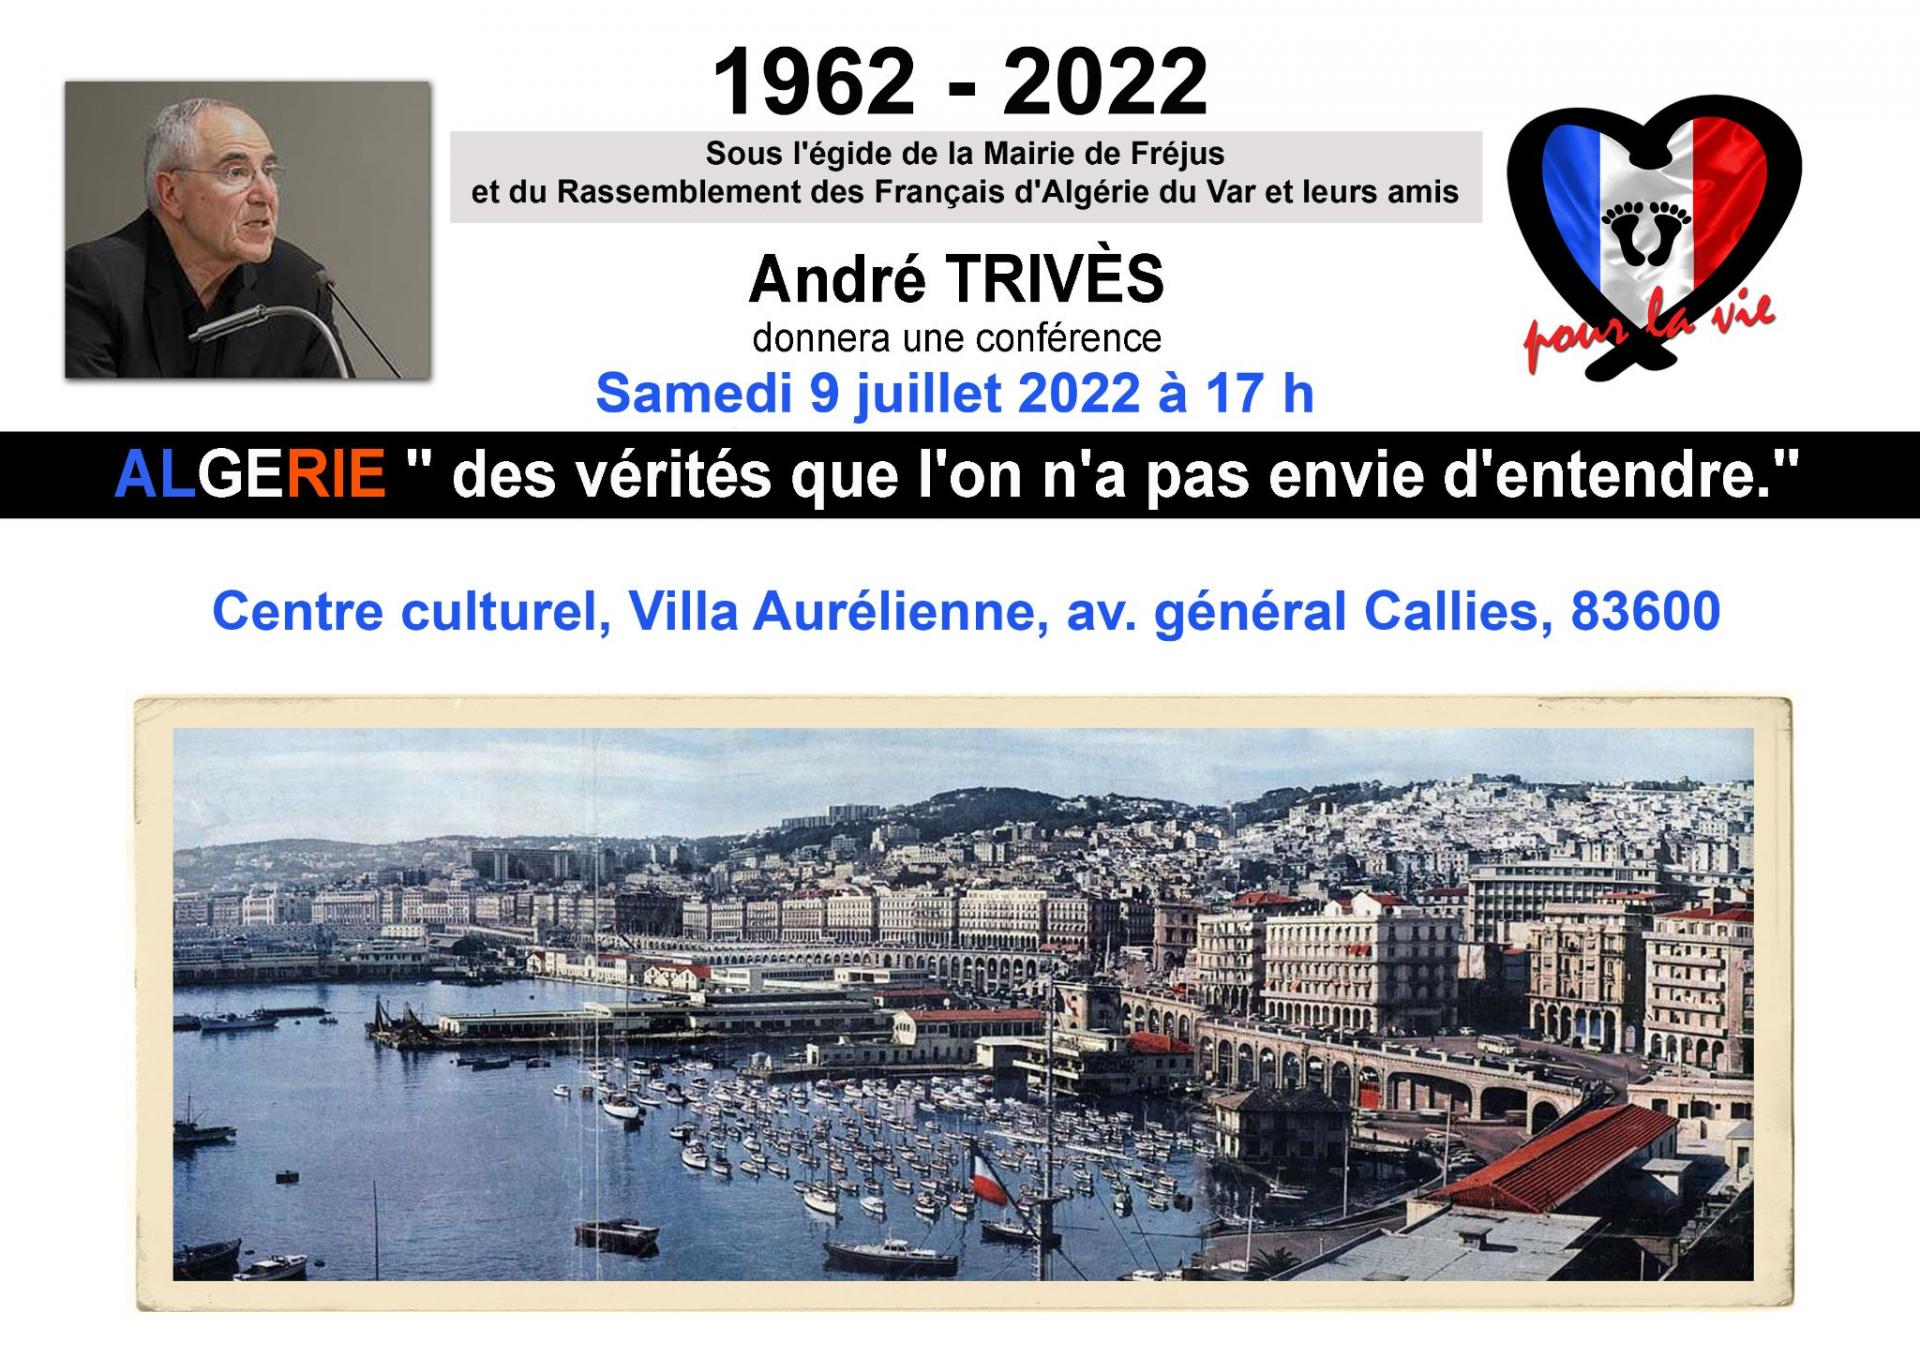 Andre trives conference